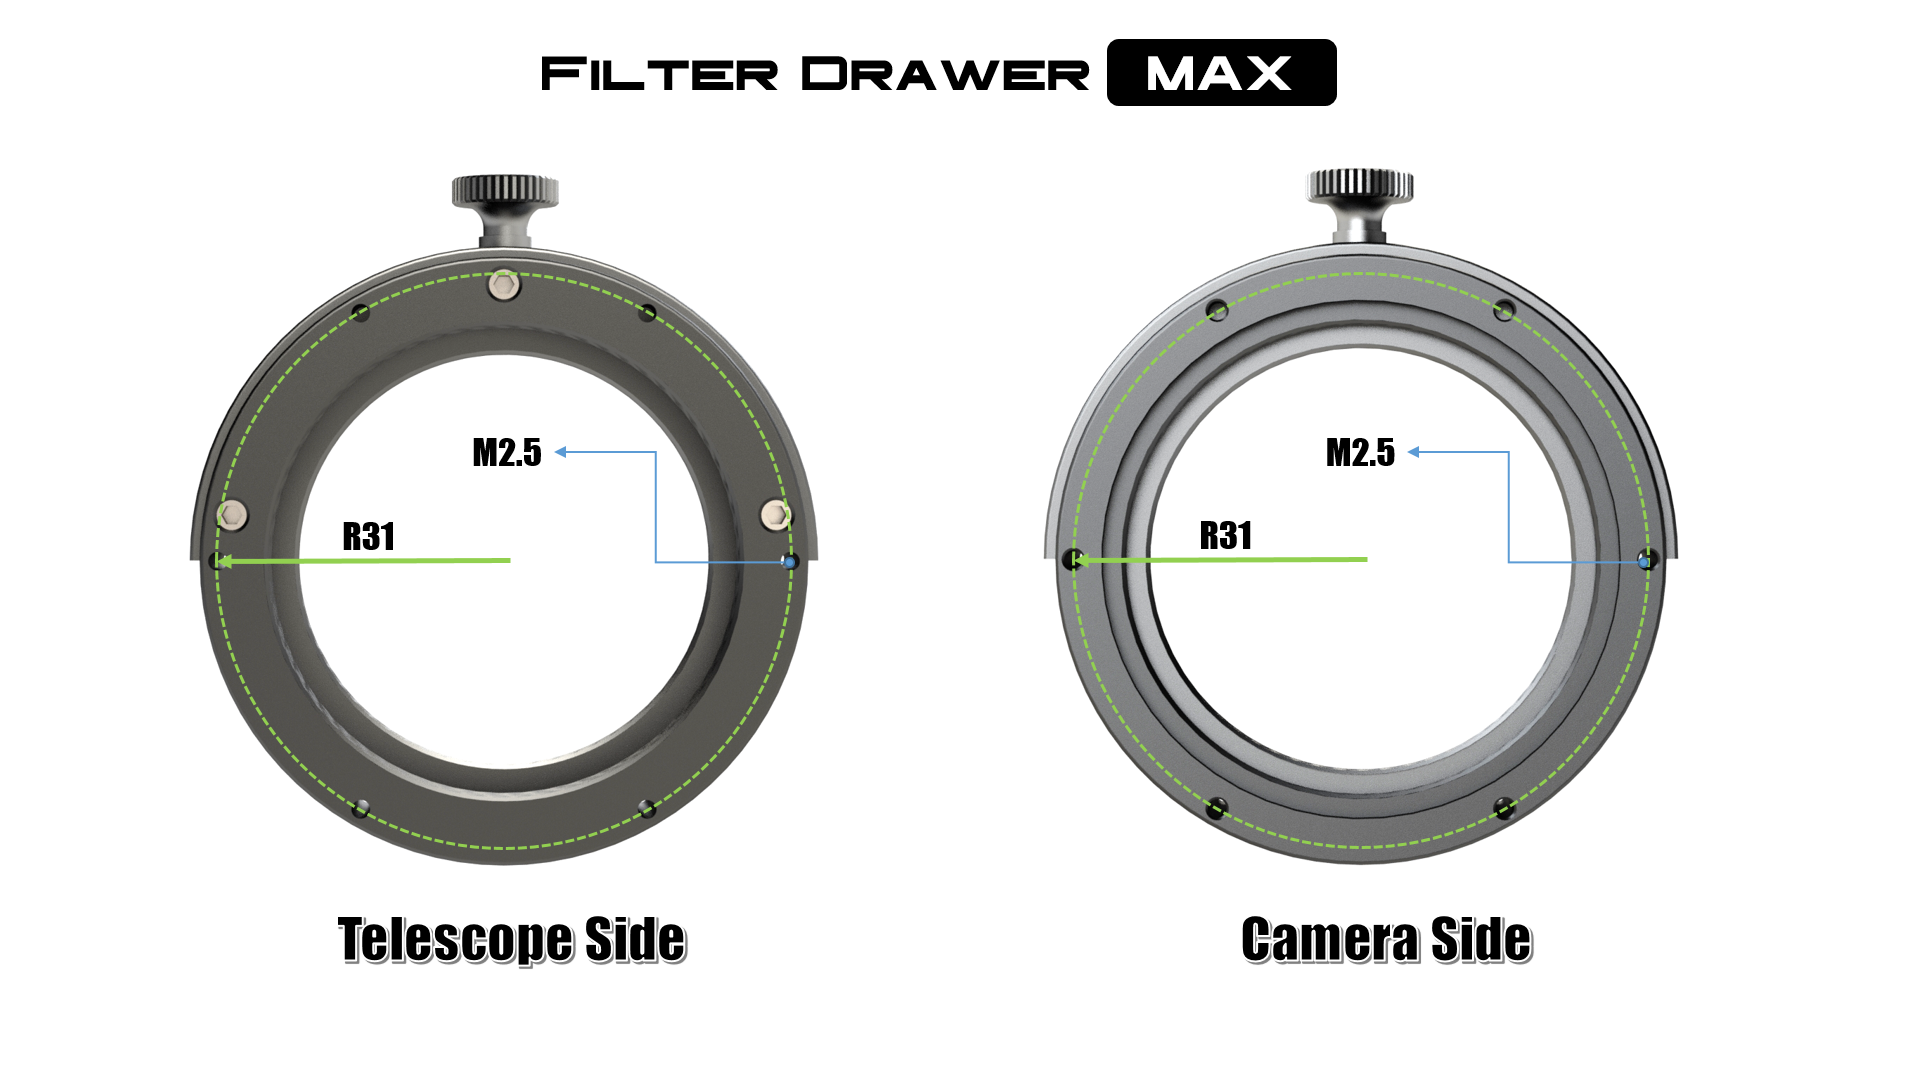 Filter-Drawer-MAX-front-and-back.png (1909×1068)